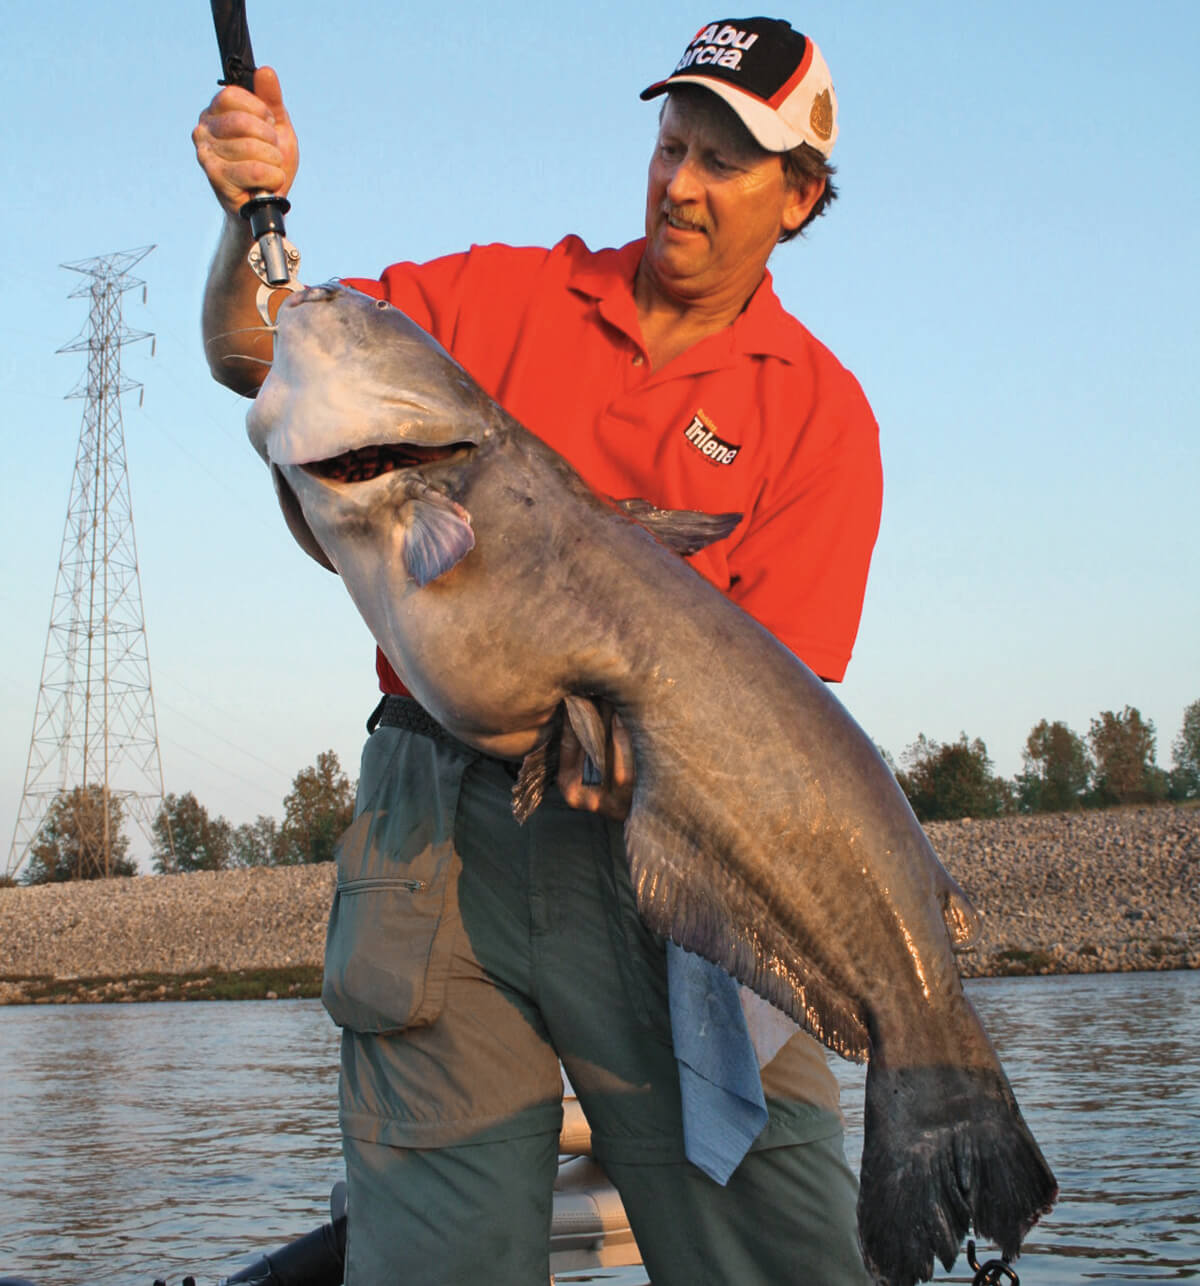 Angler holding a large catfish with a fish grip, in a boat on a river